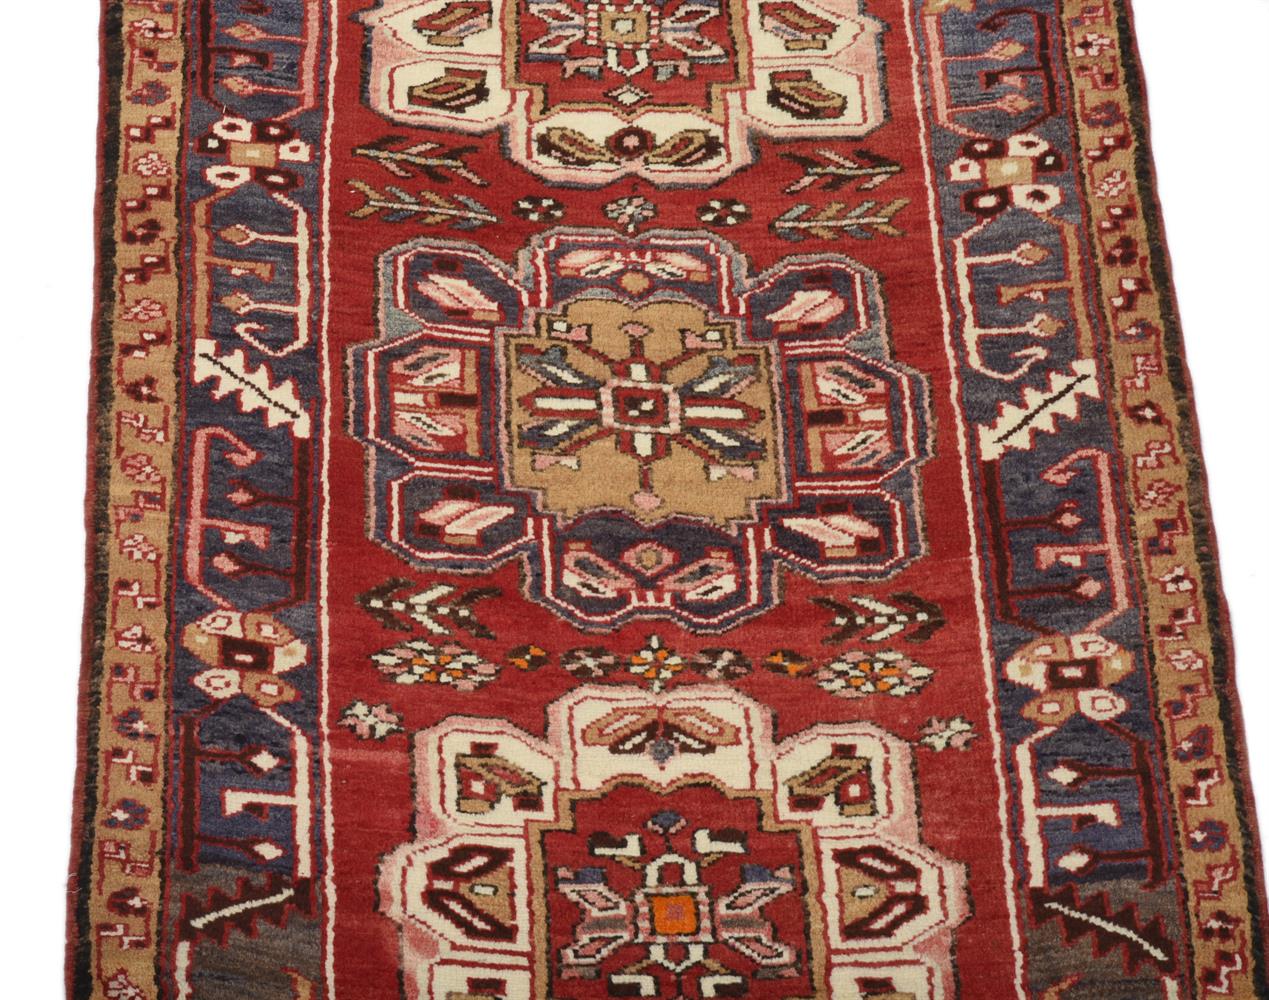 A CAUCASIAN RUNNER OR GALLERY CARPET - Image 3 of 3